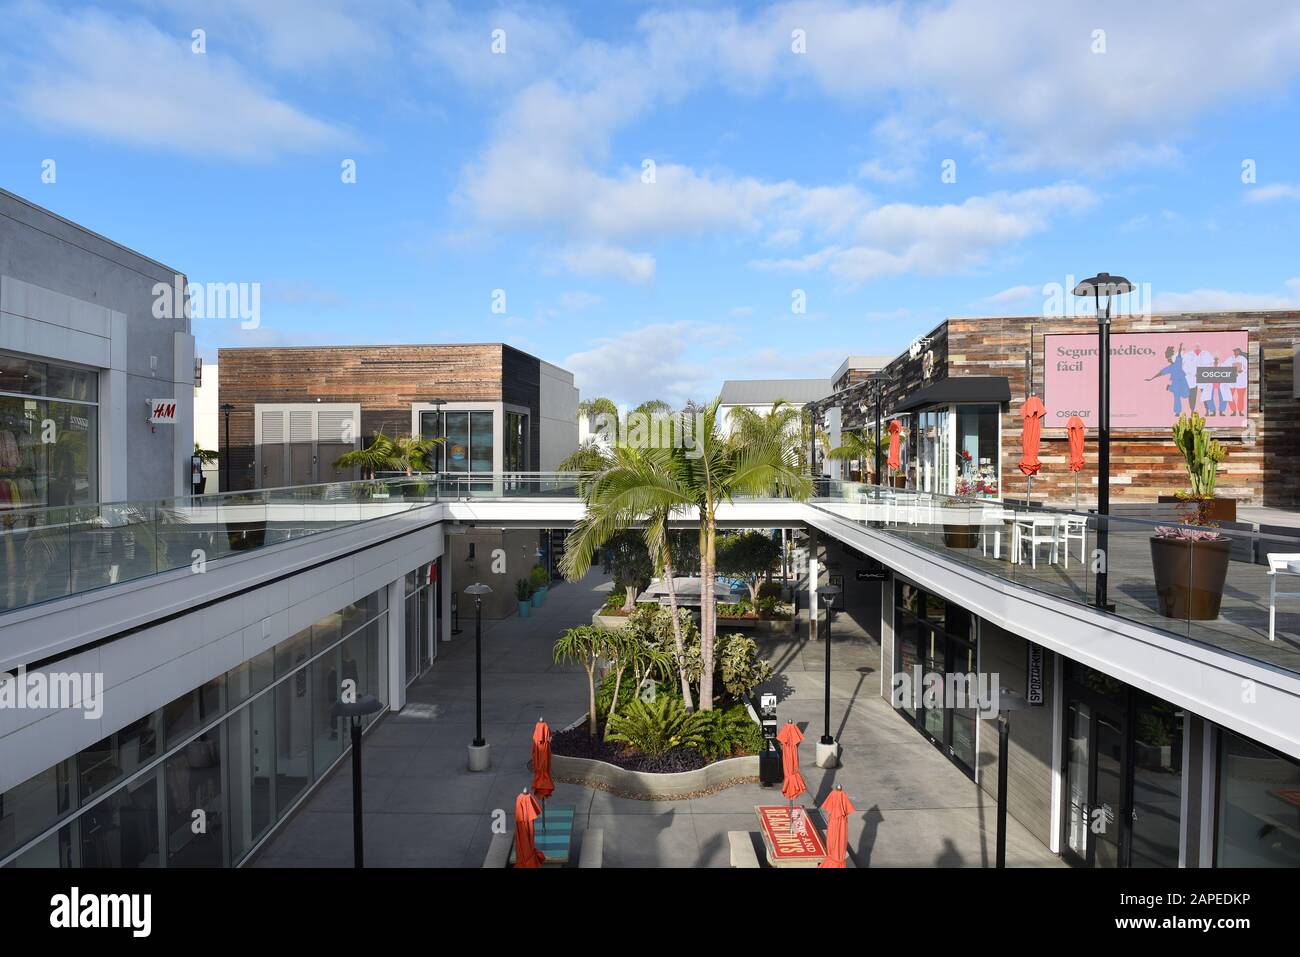 HUNTINGTON BEACH, CALIFORNIA - 22 JAN 2020: Shops and restaurants at Pacific City. The upscale development is on the Pacific Coast Highway. Stock Photo